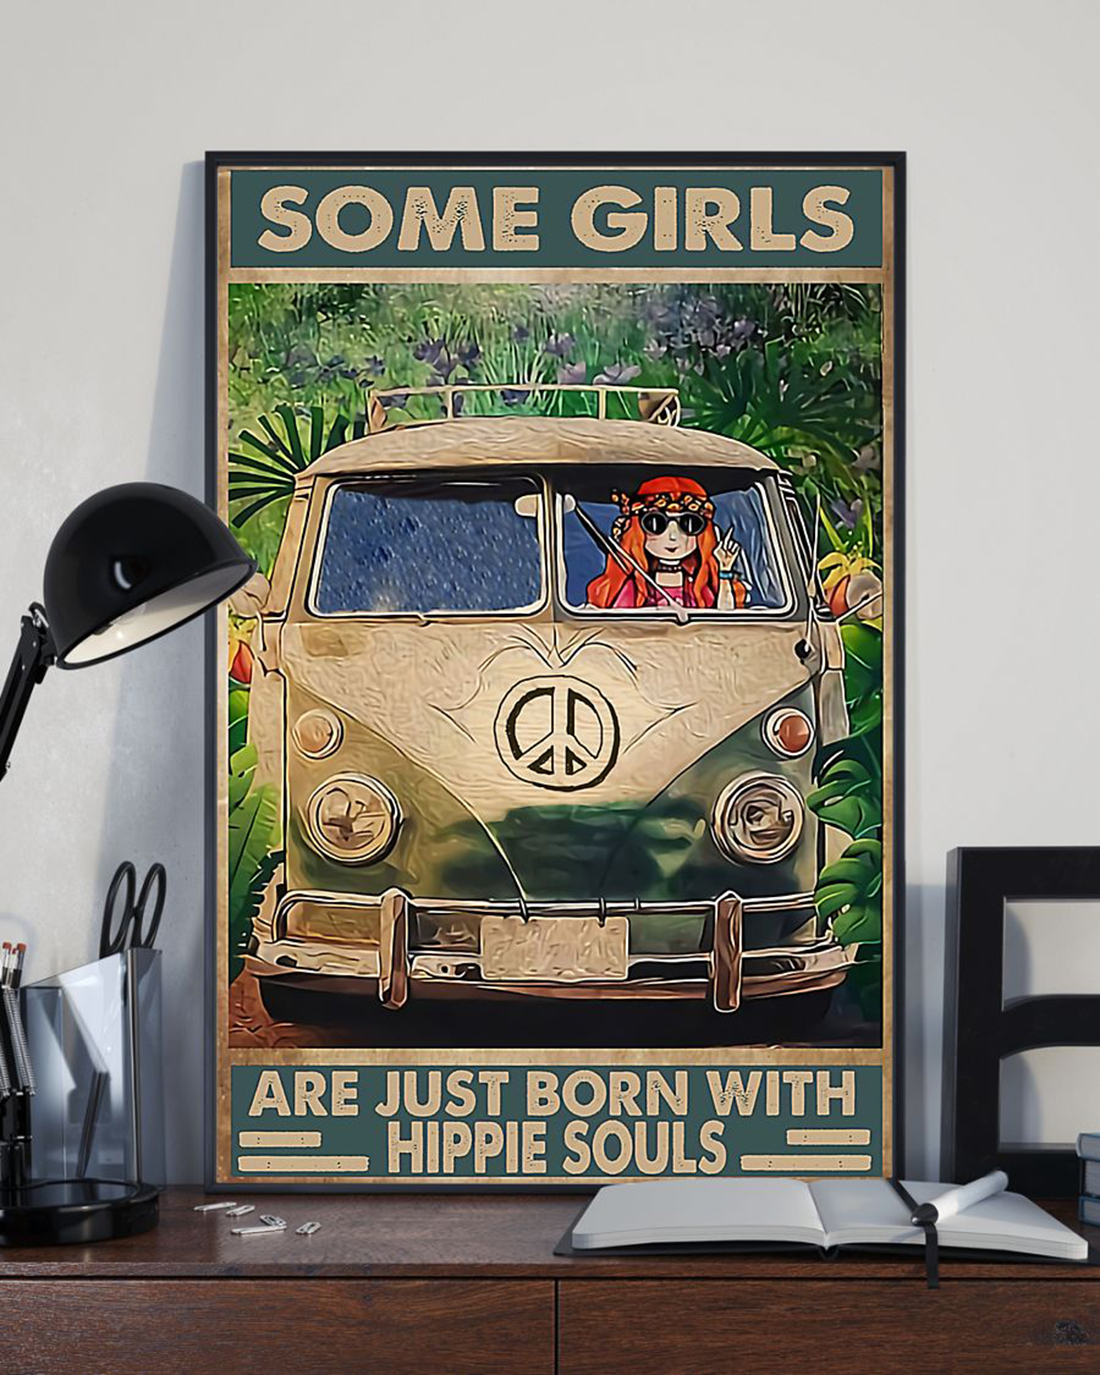 Some girl are just born with hippie souls poster